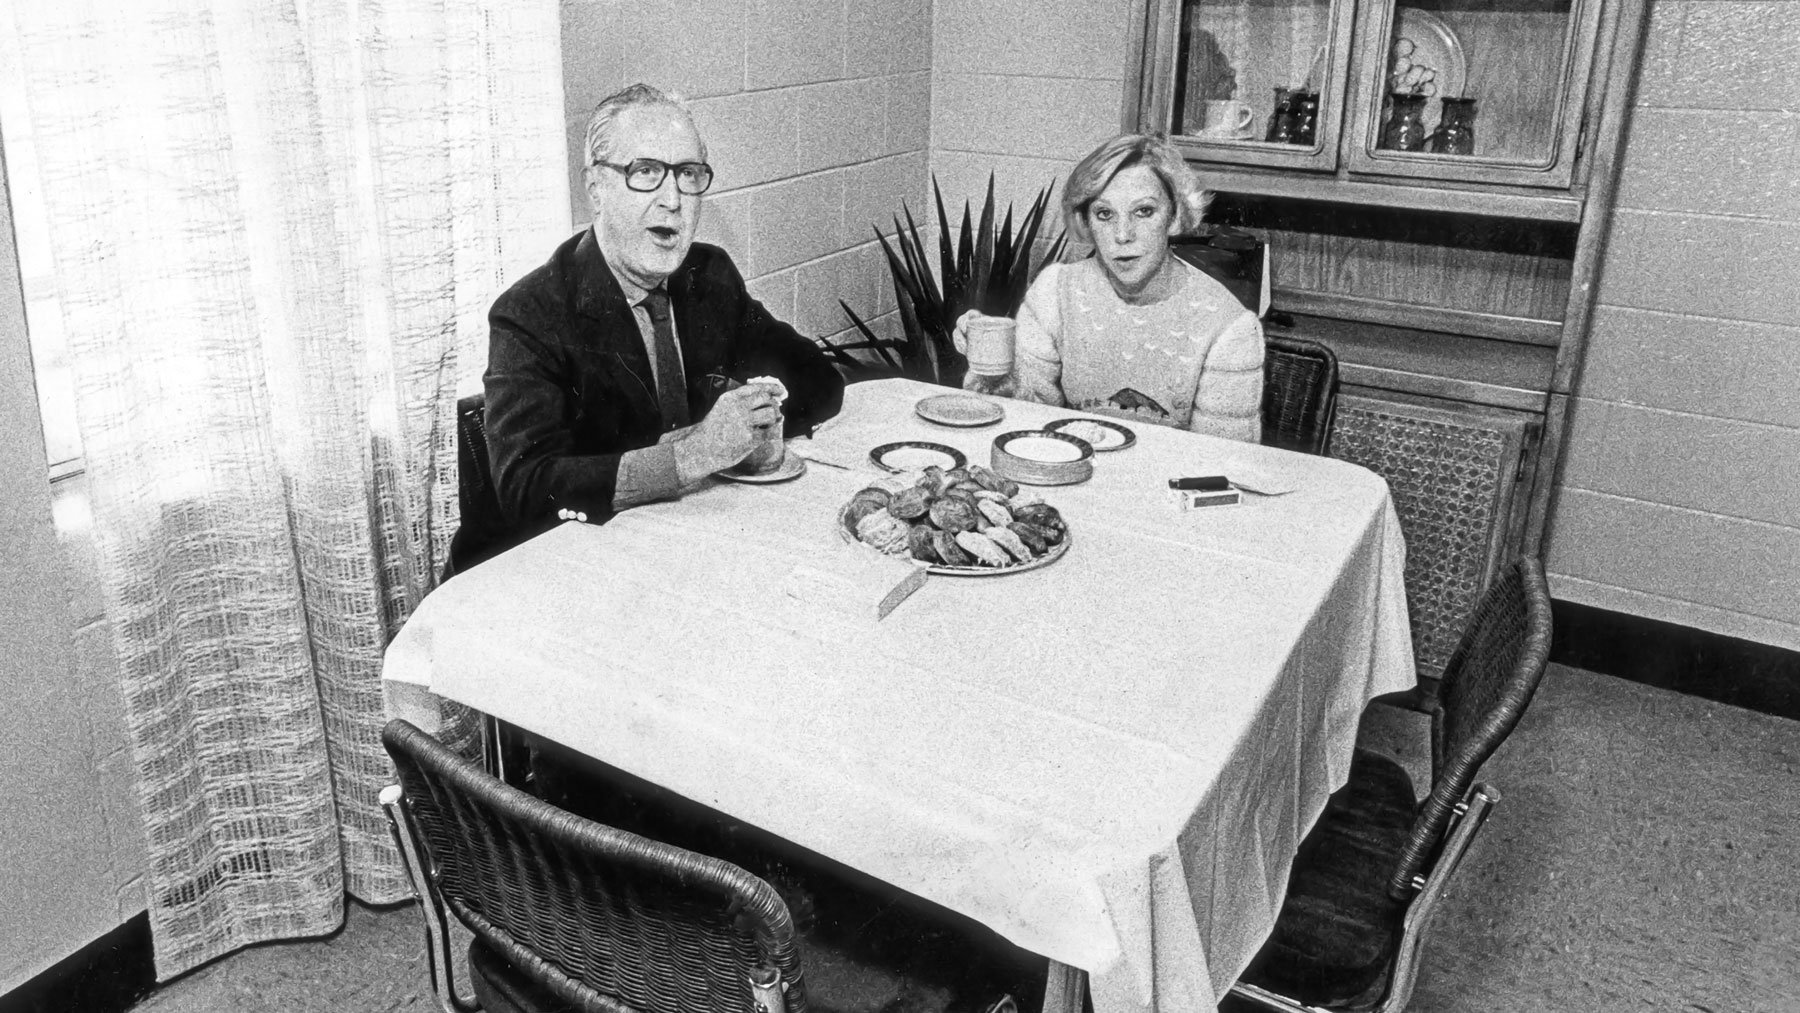 Jane Byrne and her husband sitting at table with food